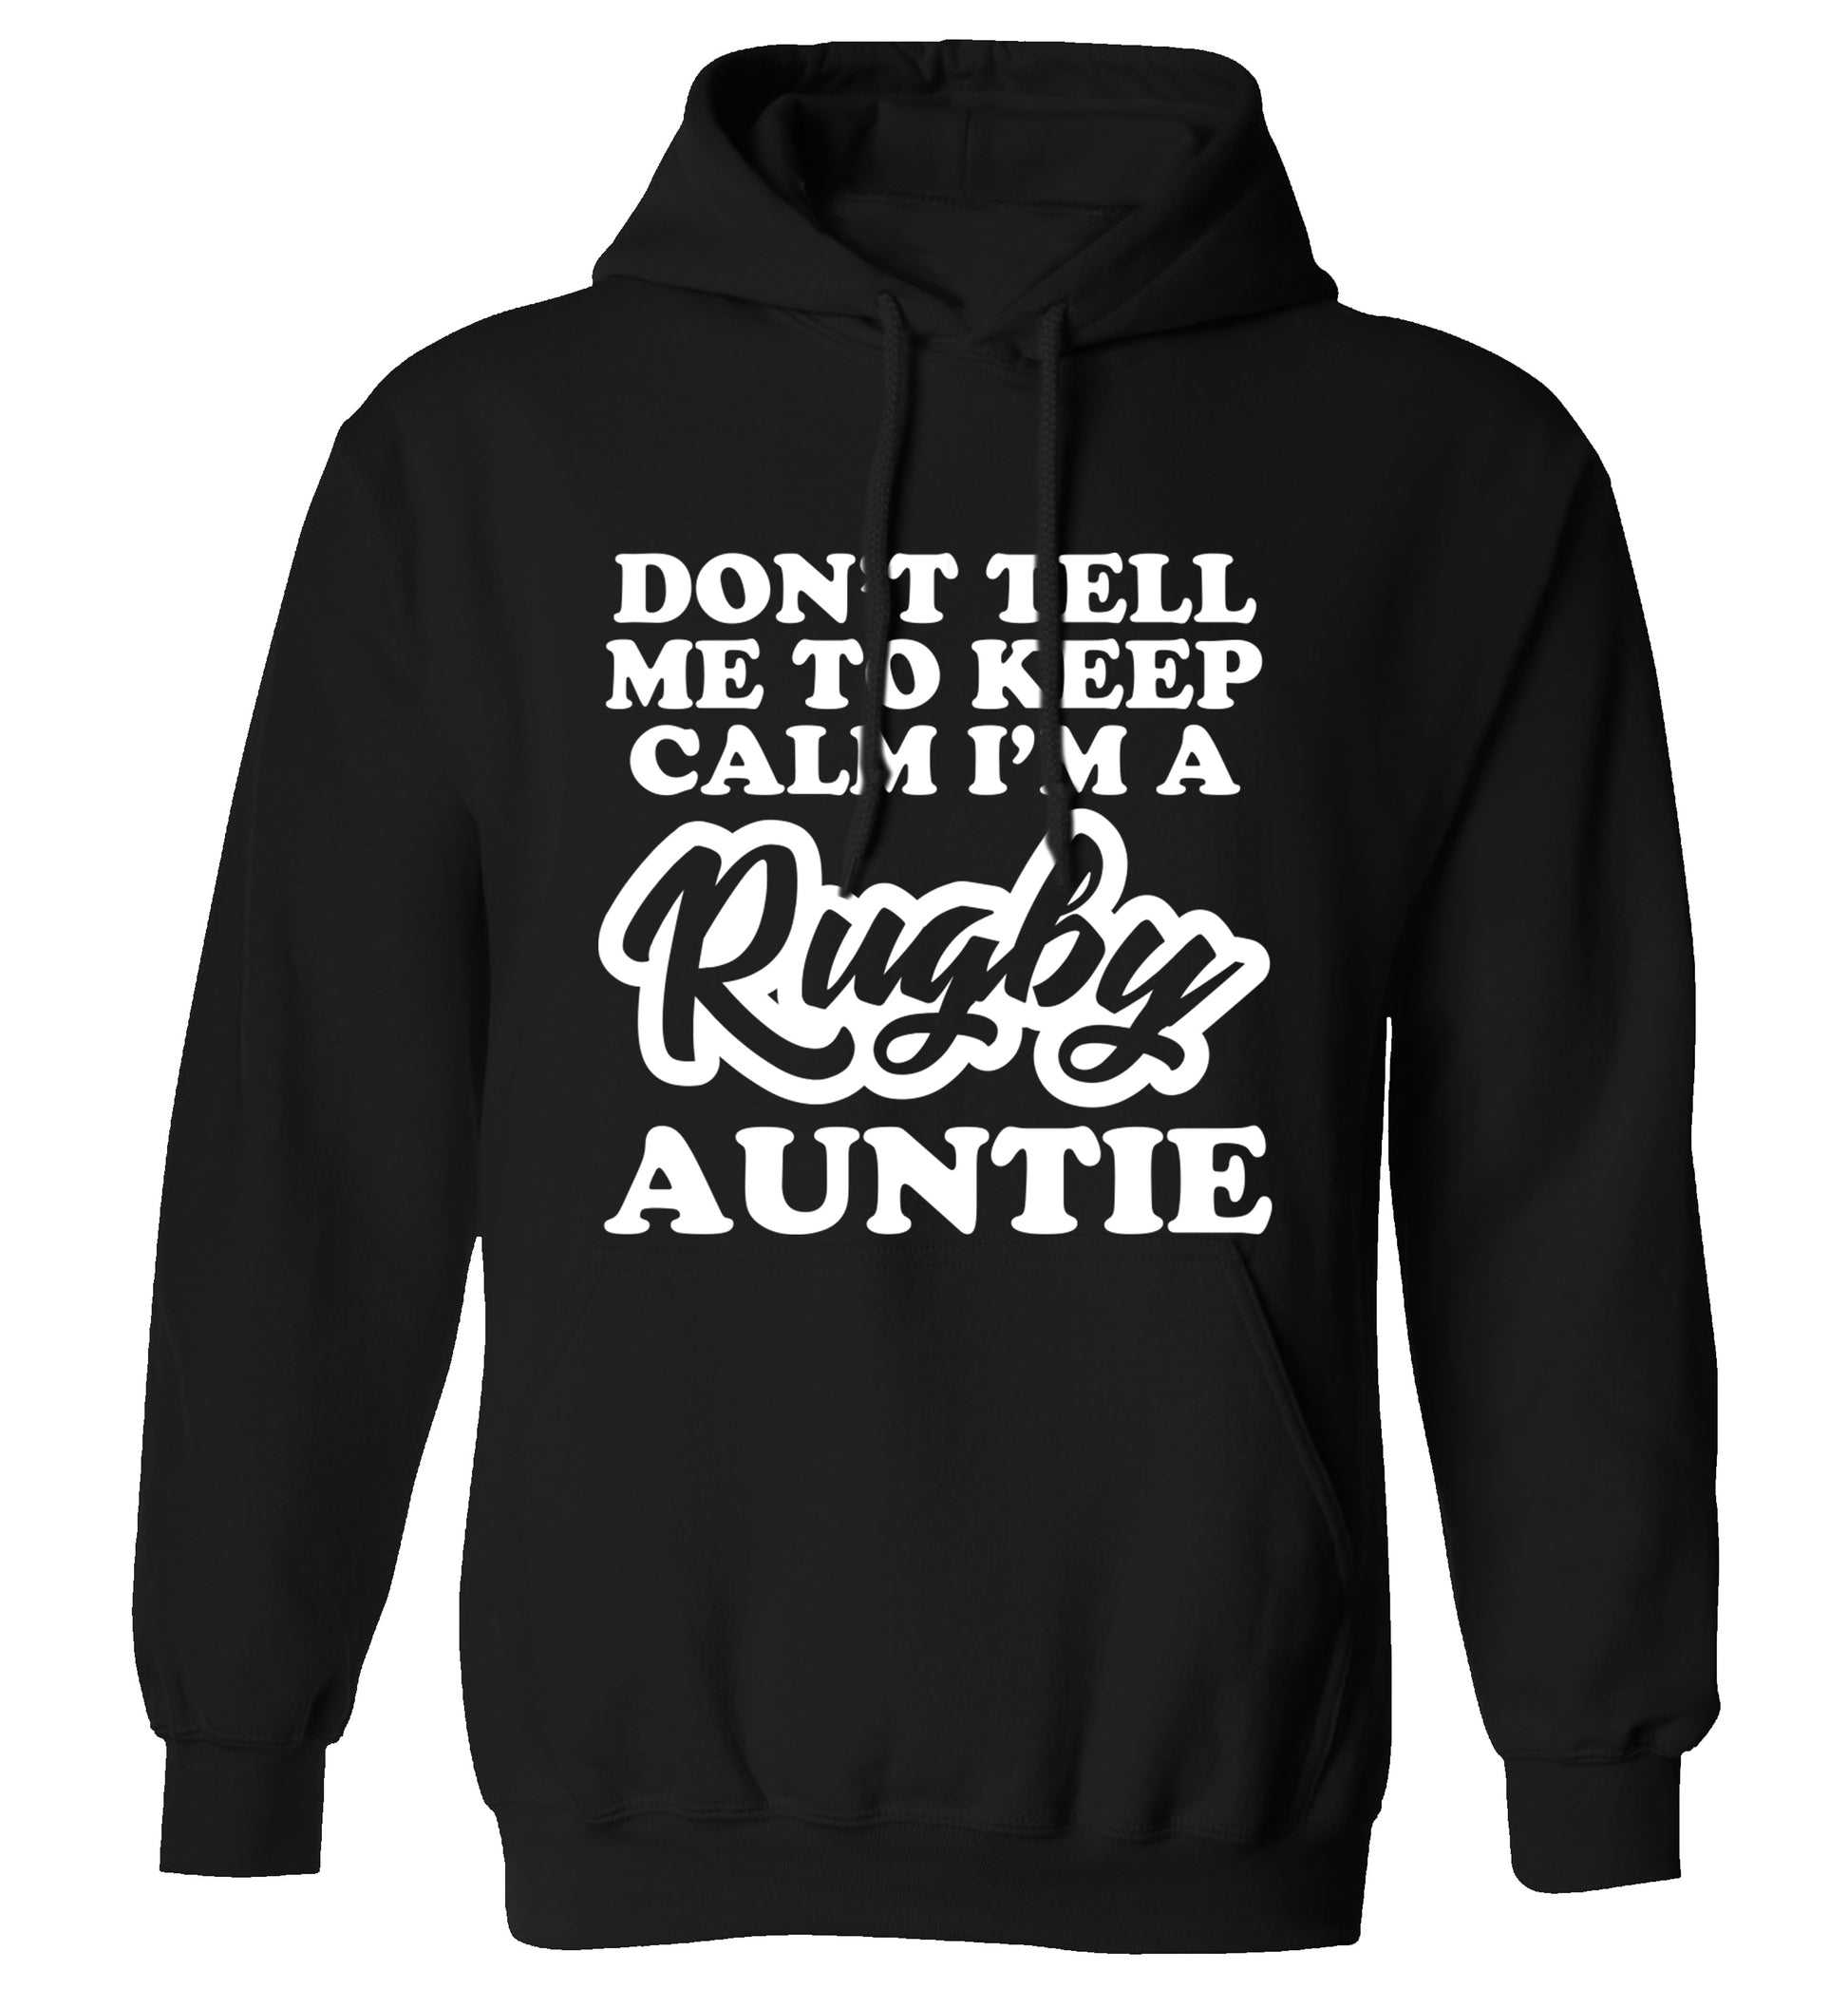 Don't tell me keep calm I'm a rugby auntie adults unisex black hoodie 2XL